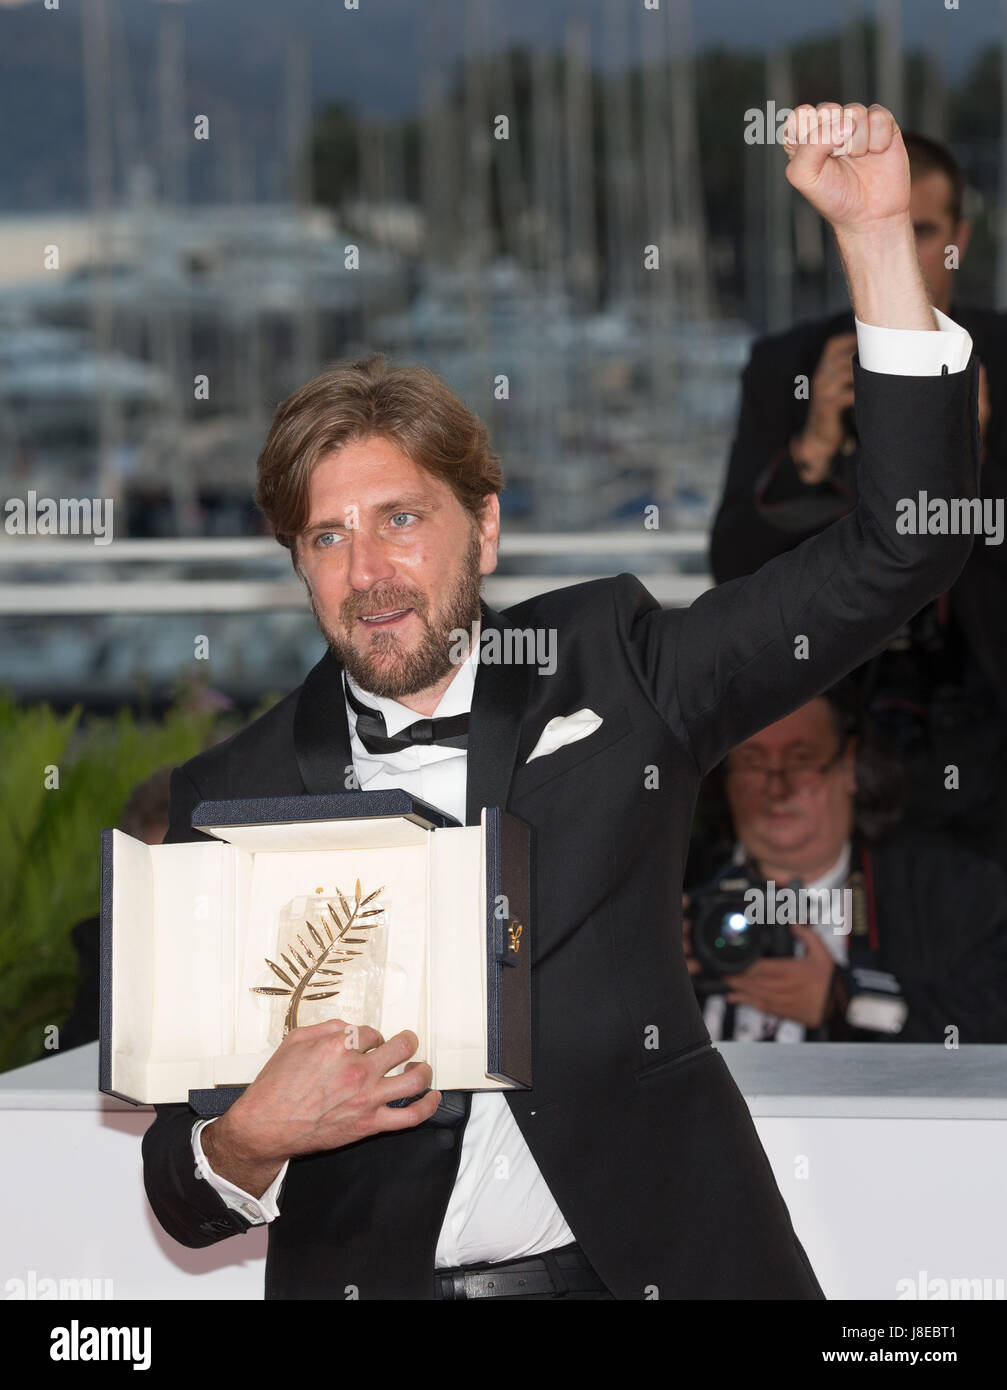 Cannes, France. 28th May, 2017. Swedish director Ruben Ostlund poses with his trophy during a photocall at the 70th Cannes Film Festival in Cannes, France, May 28, 2017. Film 'The Square', directed by Ruben Ostlund, won the Palme d'Or of the 70th Cannes Film Festival. Credit: Xu Jinquan/Xinhua/Alamy Live News Stock Photo